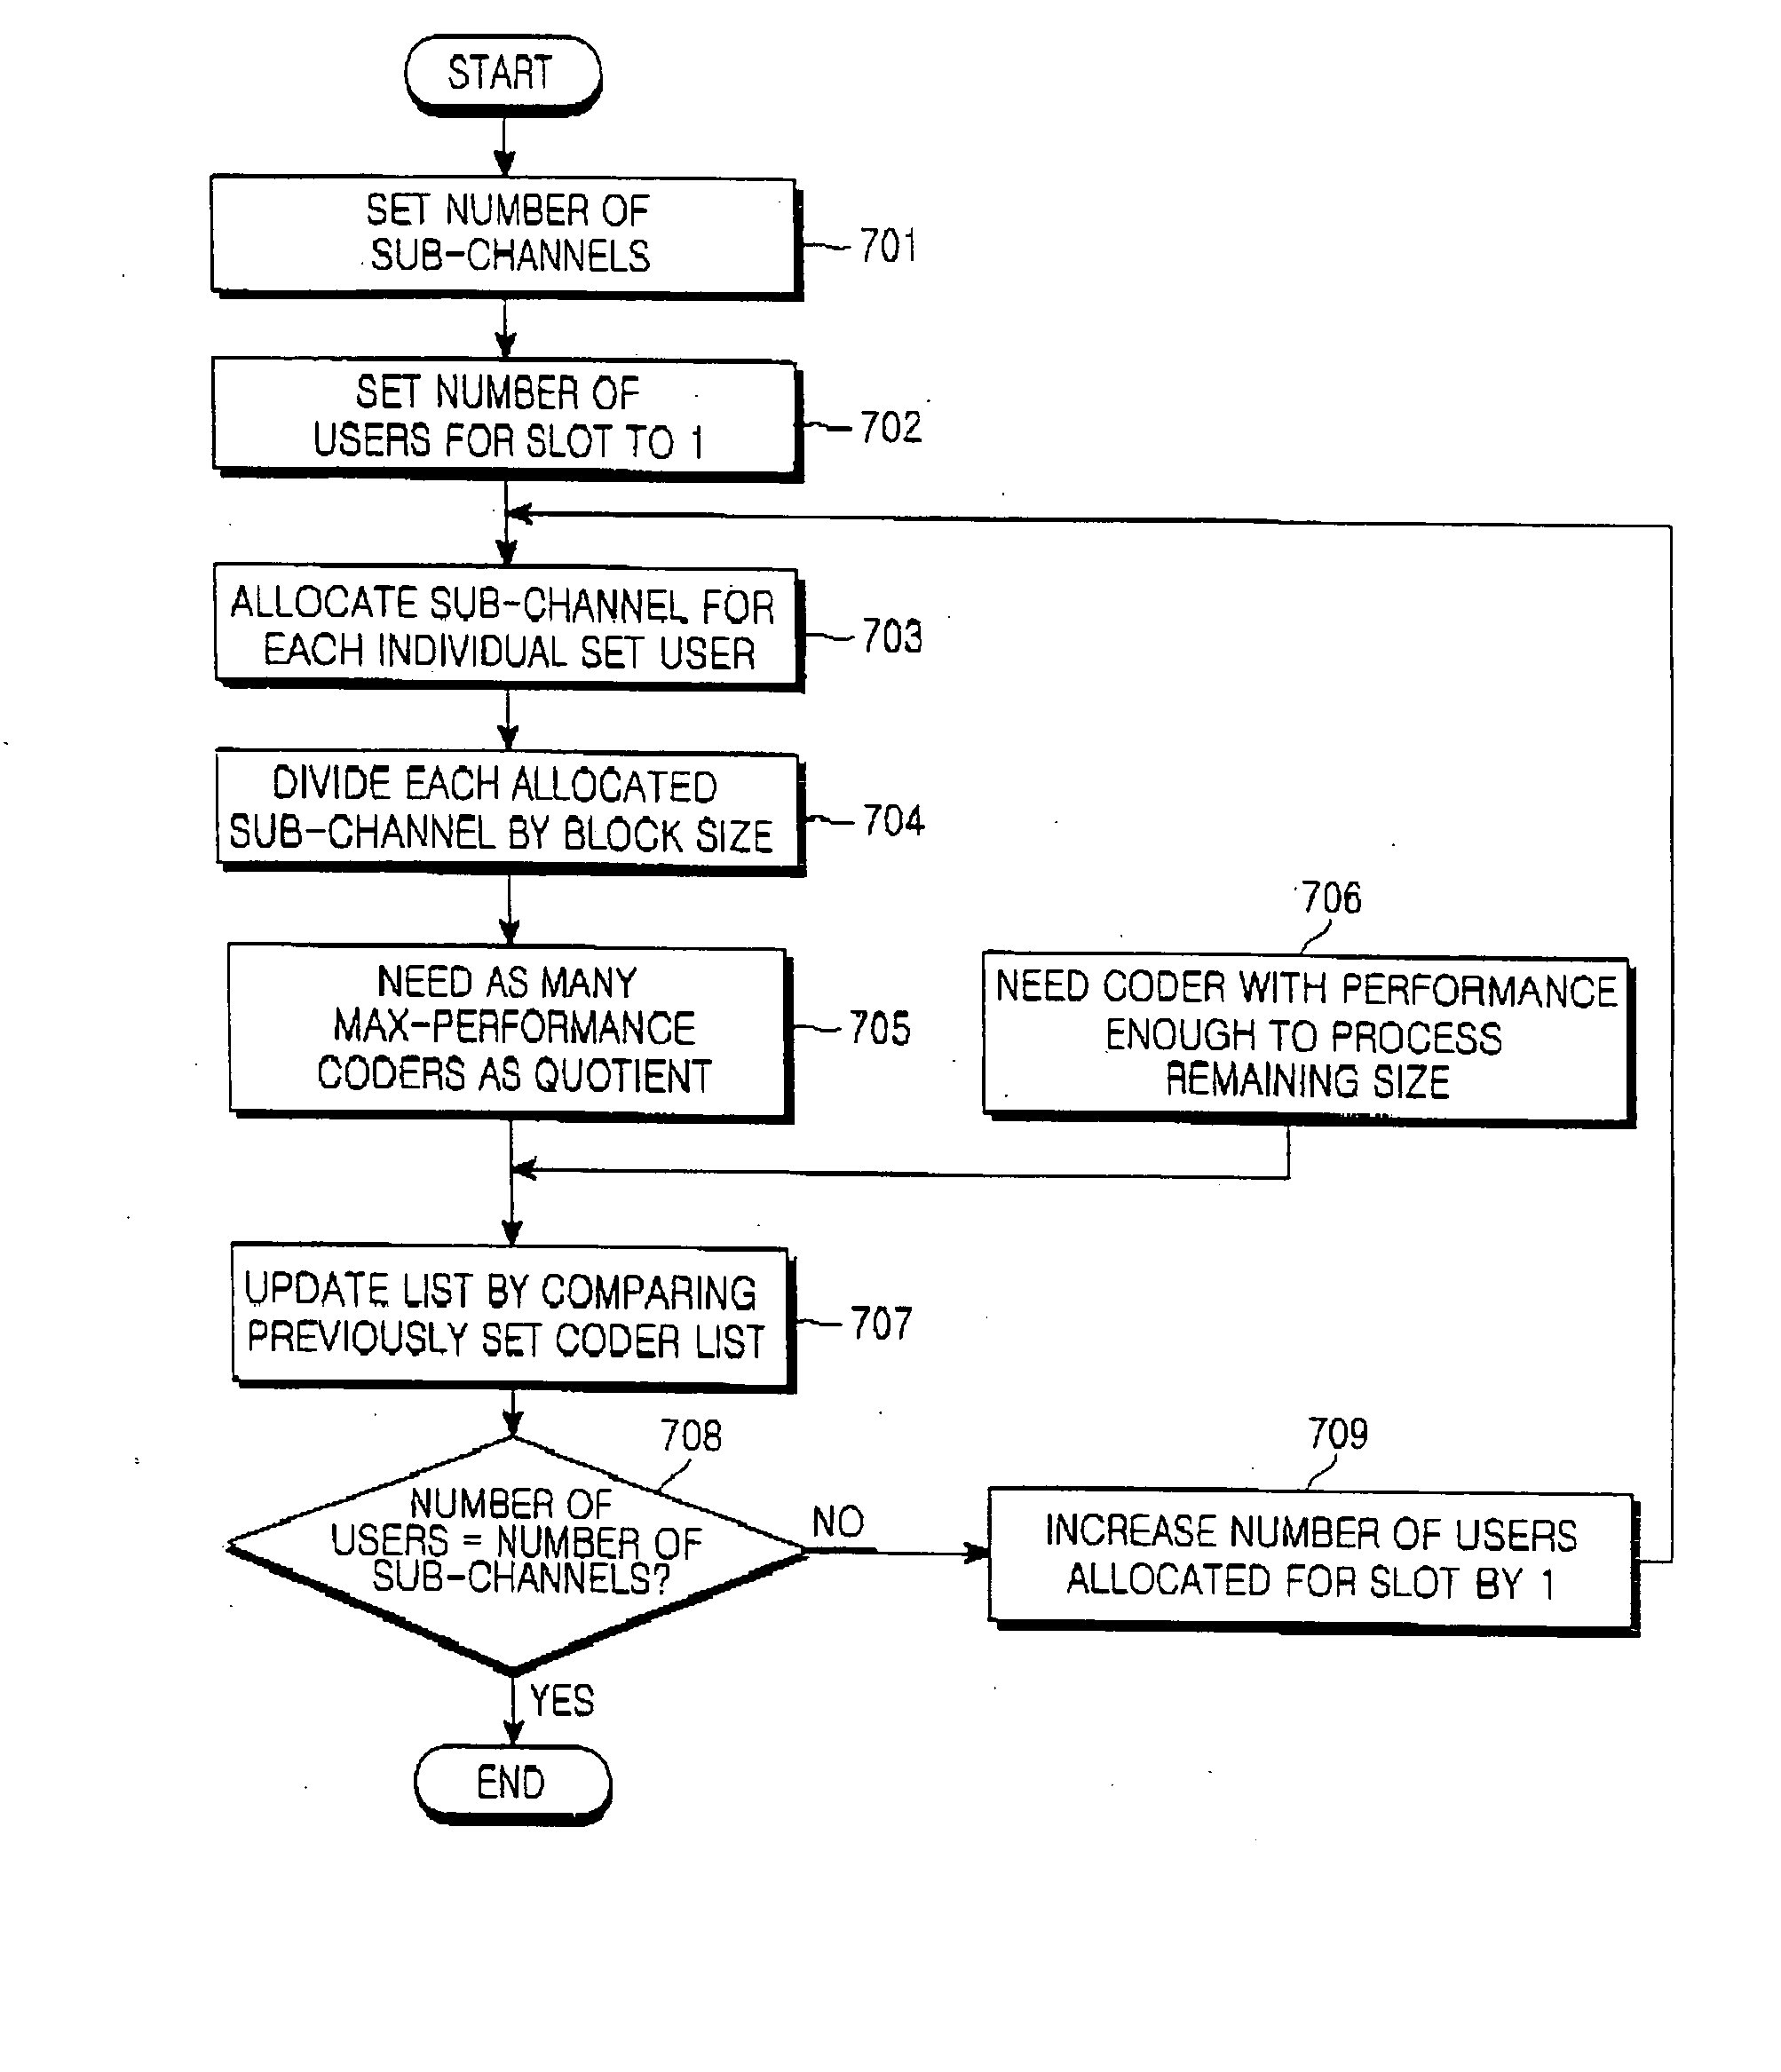 Coding/decoding apparatus for orthogonal frequency division multiple access communication system and method for designing the same